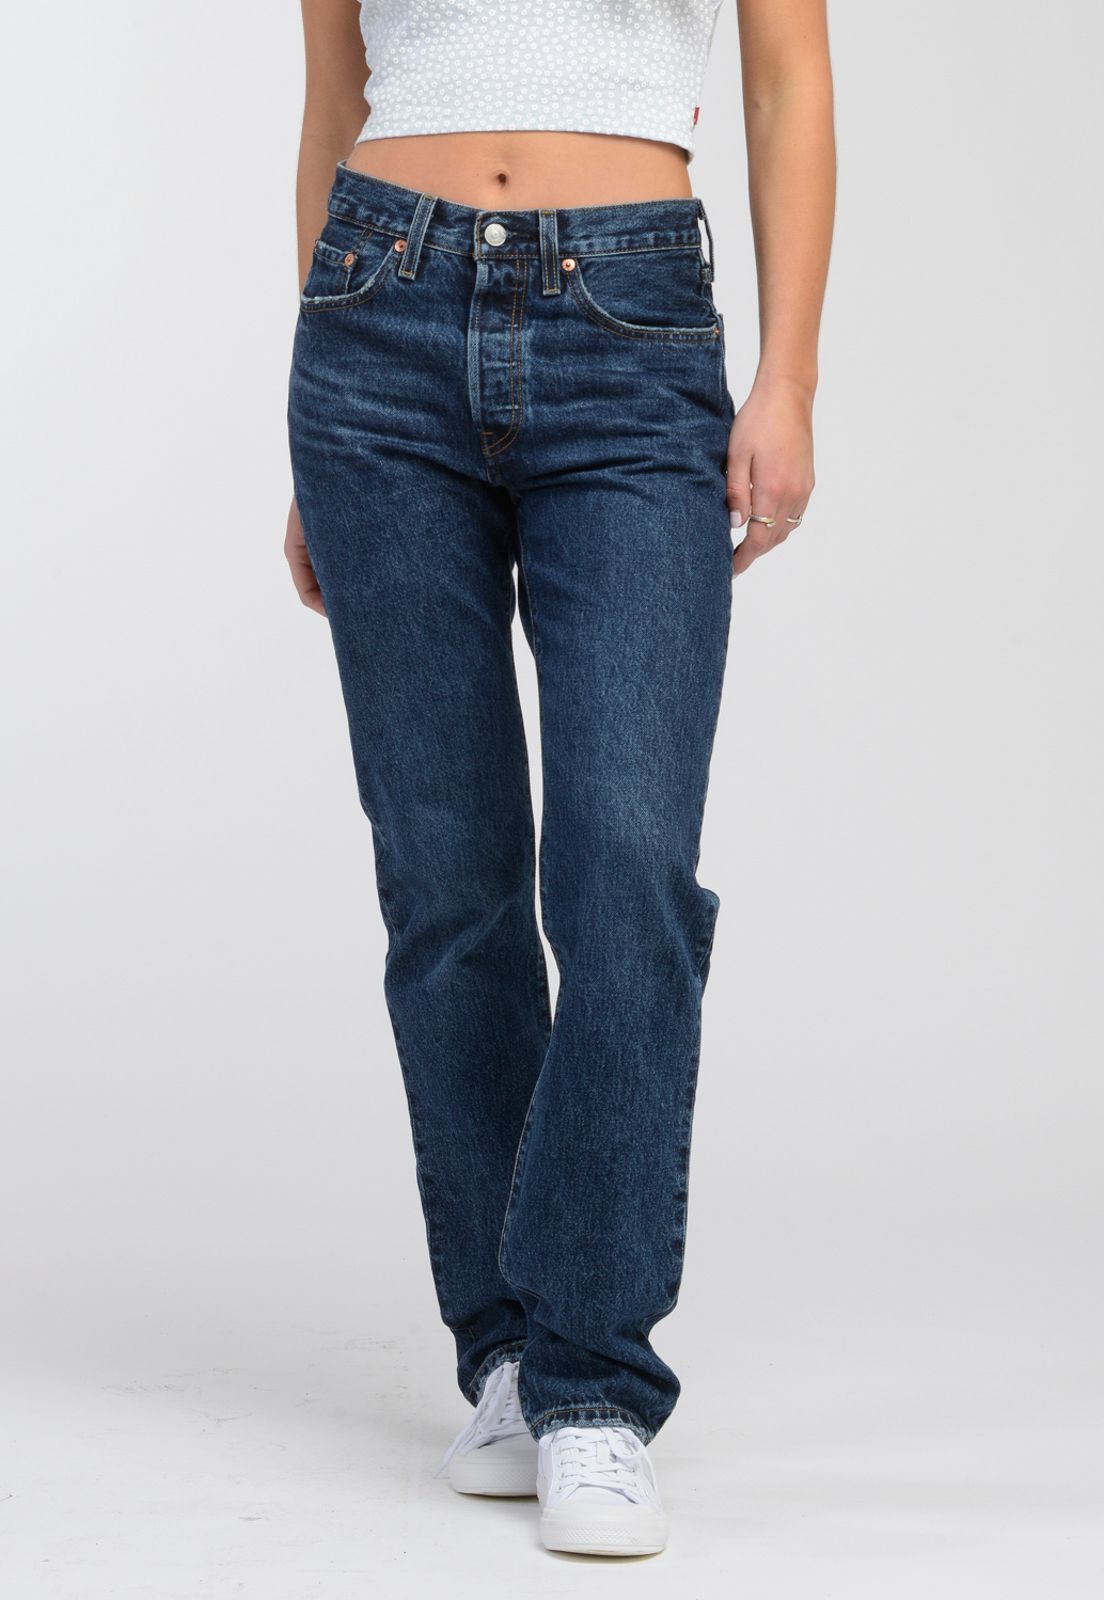 Jeans Mujer 501 Original Fit Azul Oscuro Levis 12501-0395 - Jeans y  Pantalones